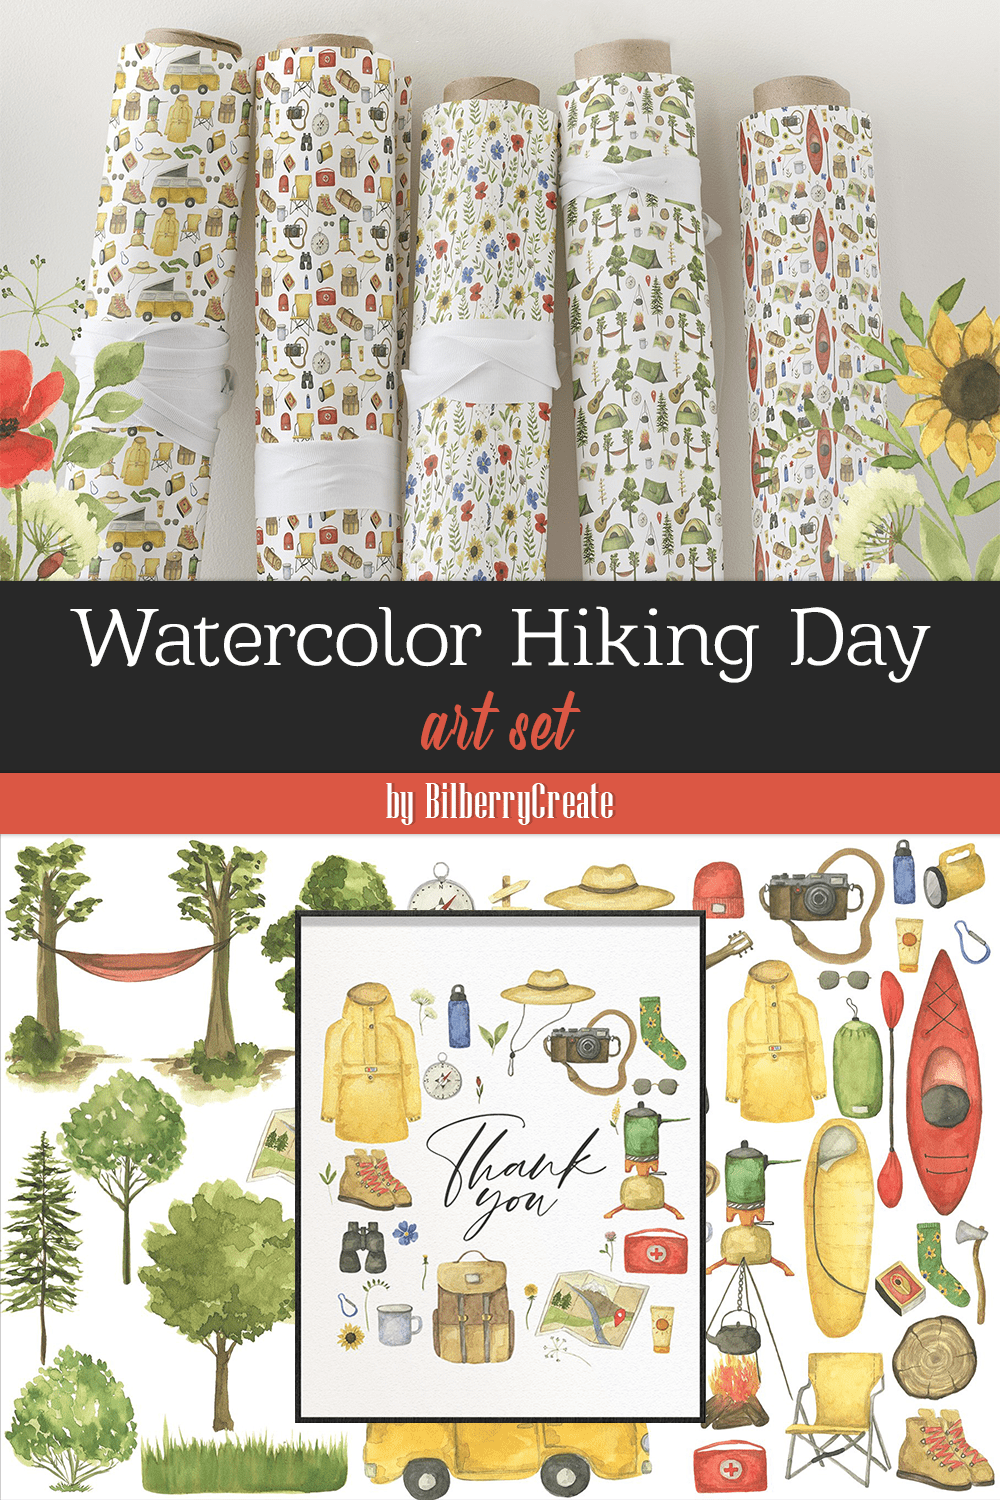 Watercolor hiking day art set - pinterest image preview.